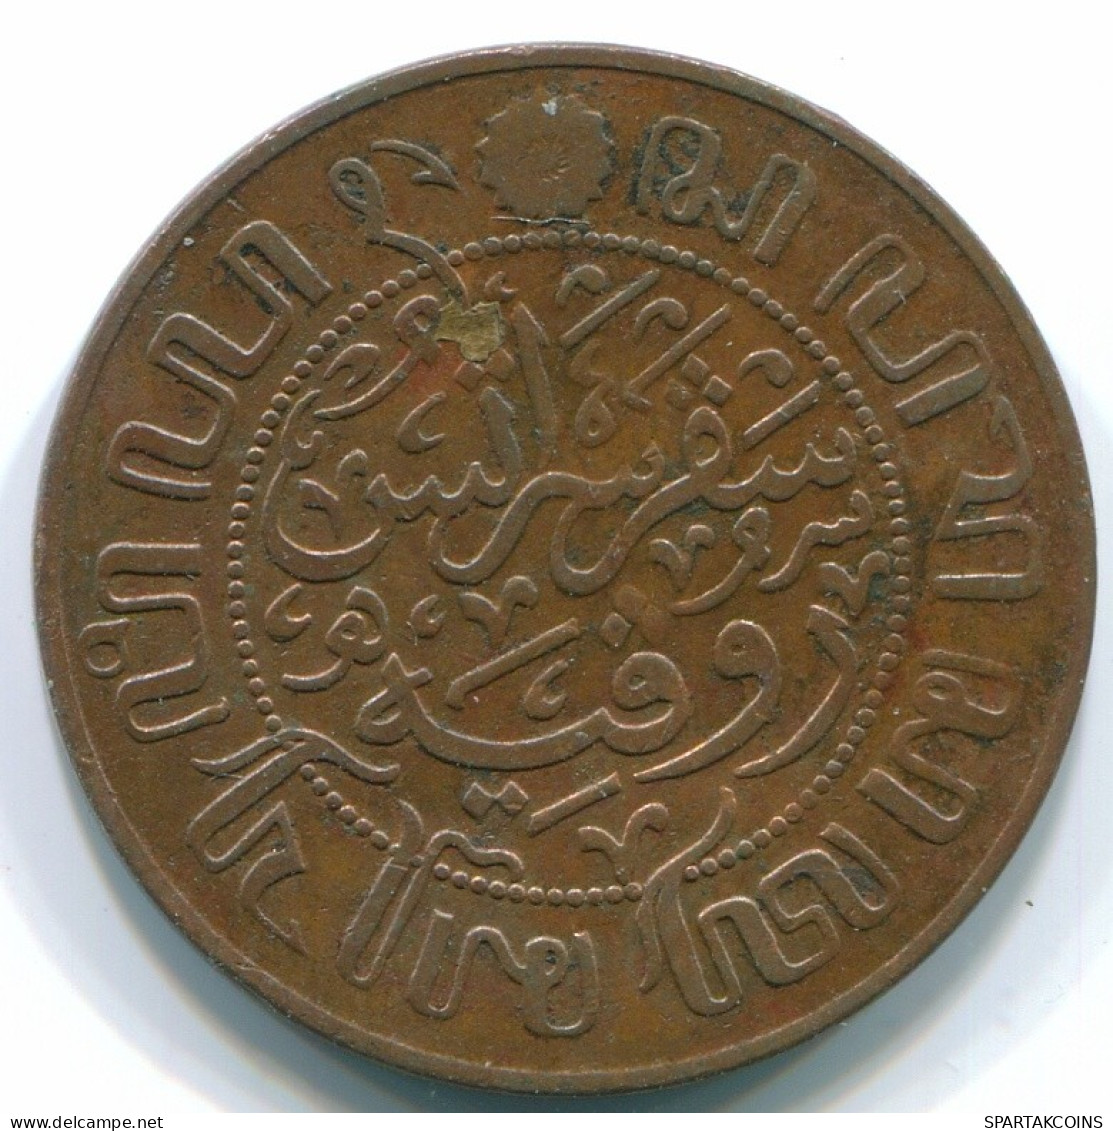 1 CENT 1929 NETHERLANDS EAST INDIES INDONESIA Copper Colonial Coin #S10110.U.A - Dutch East Indies